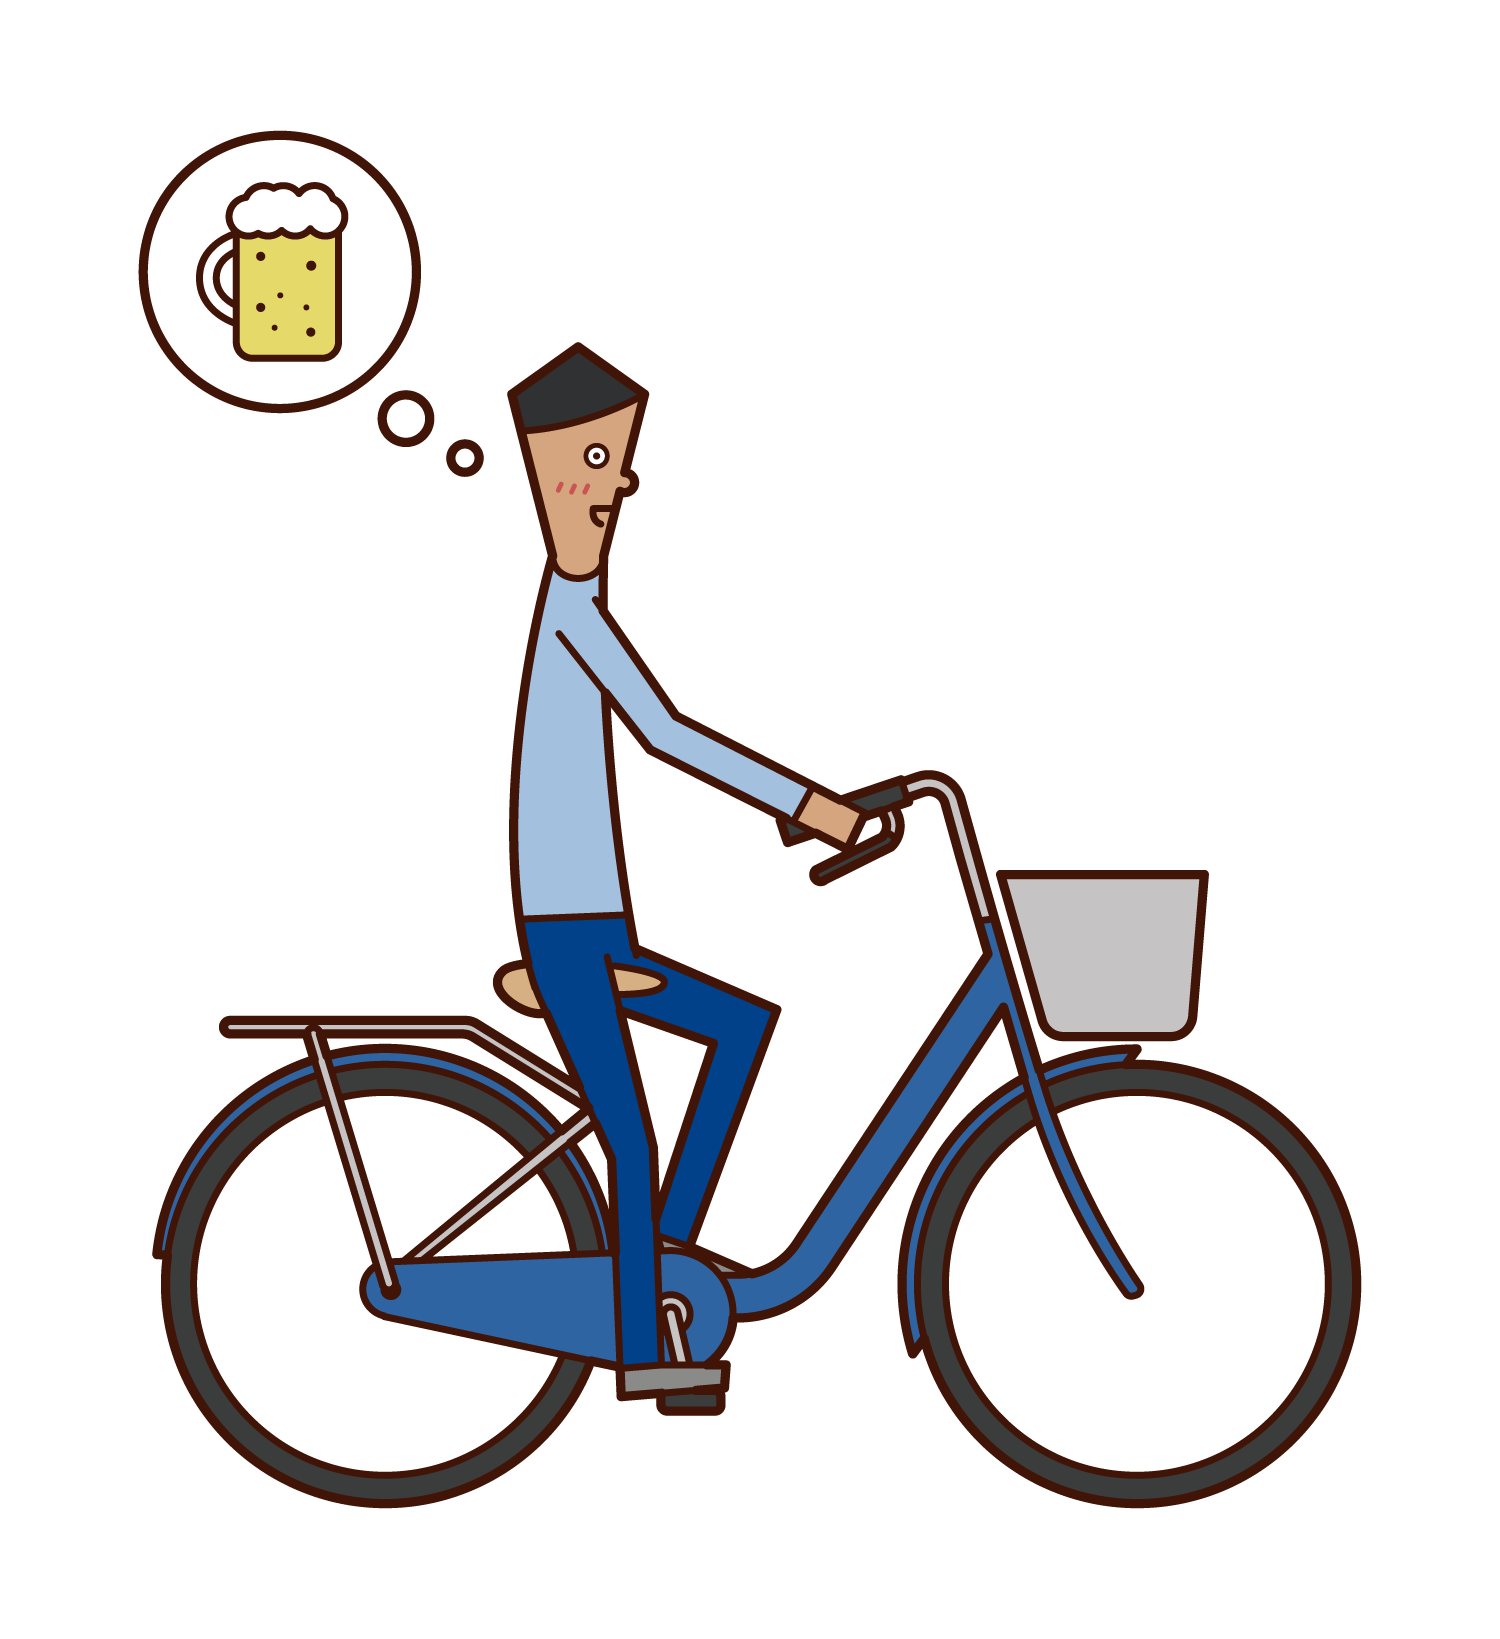 Illustration of a man who drinks and drinks on a bicycle